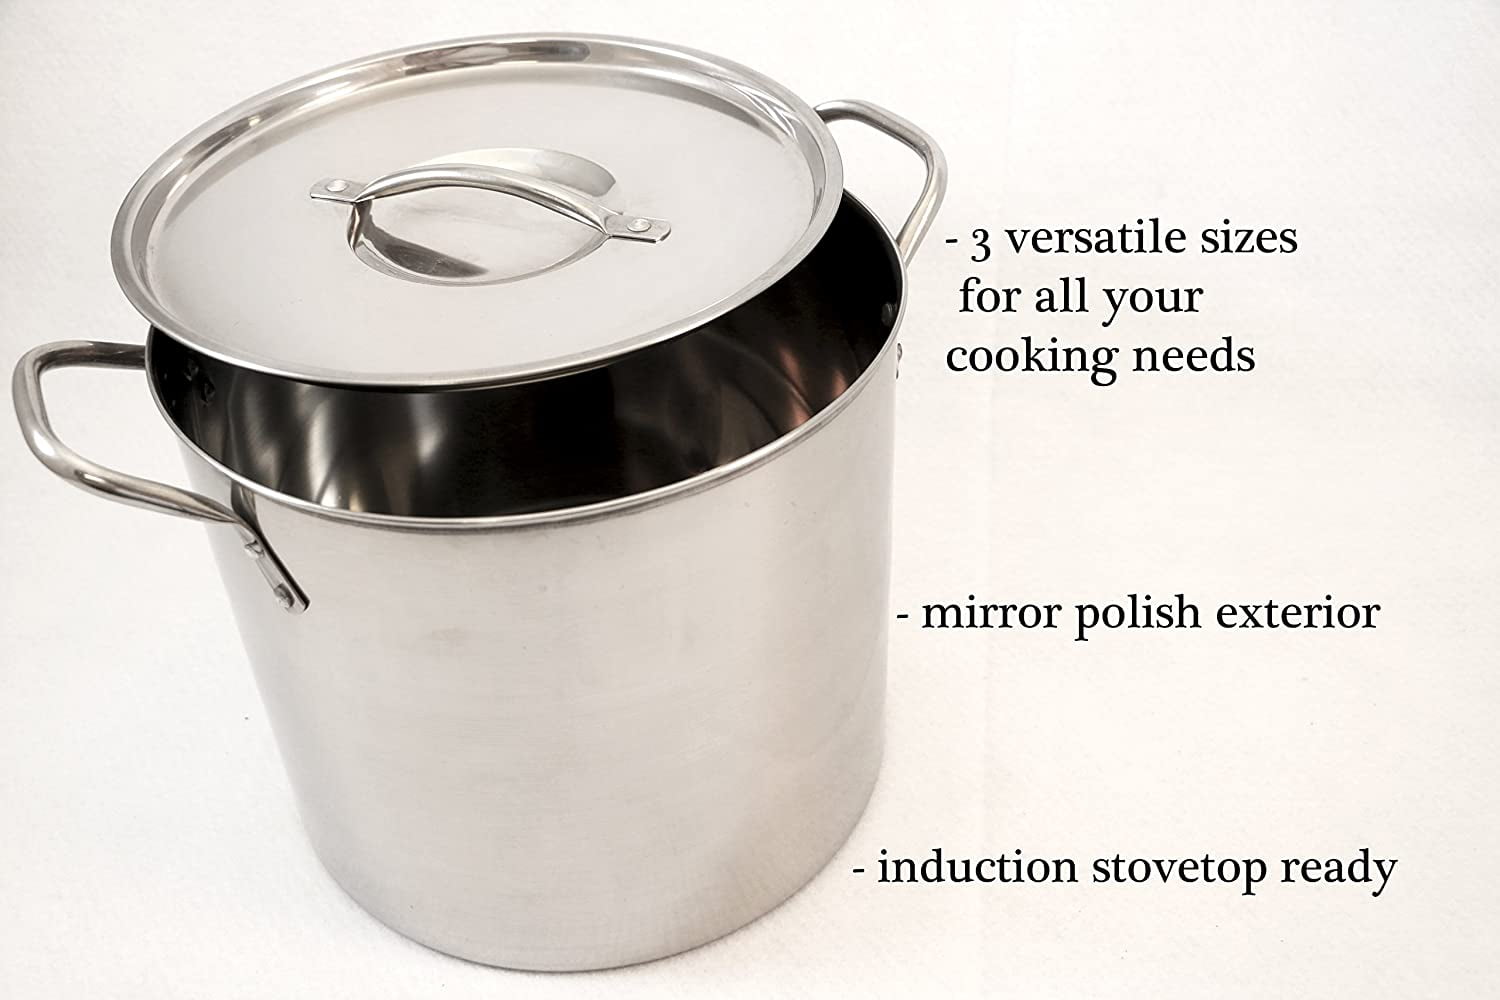 ExcelSteel Stainless Steel Stockpot with Lids, Set of 3, 3 Piece, Silver 